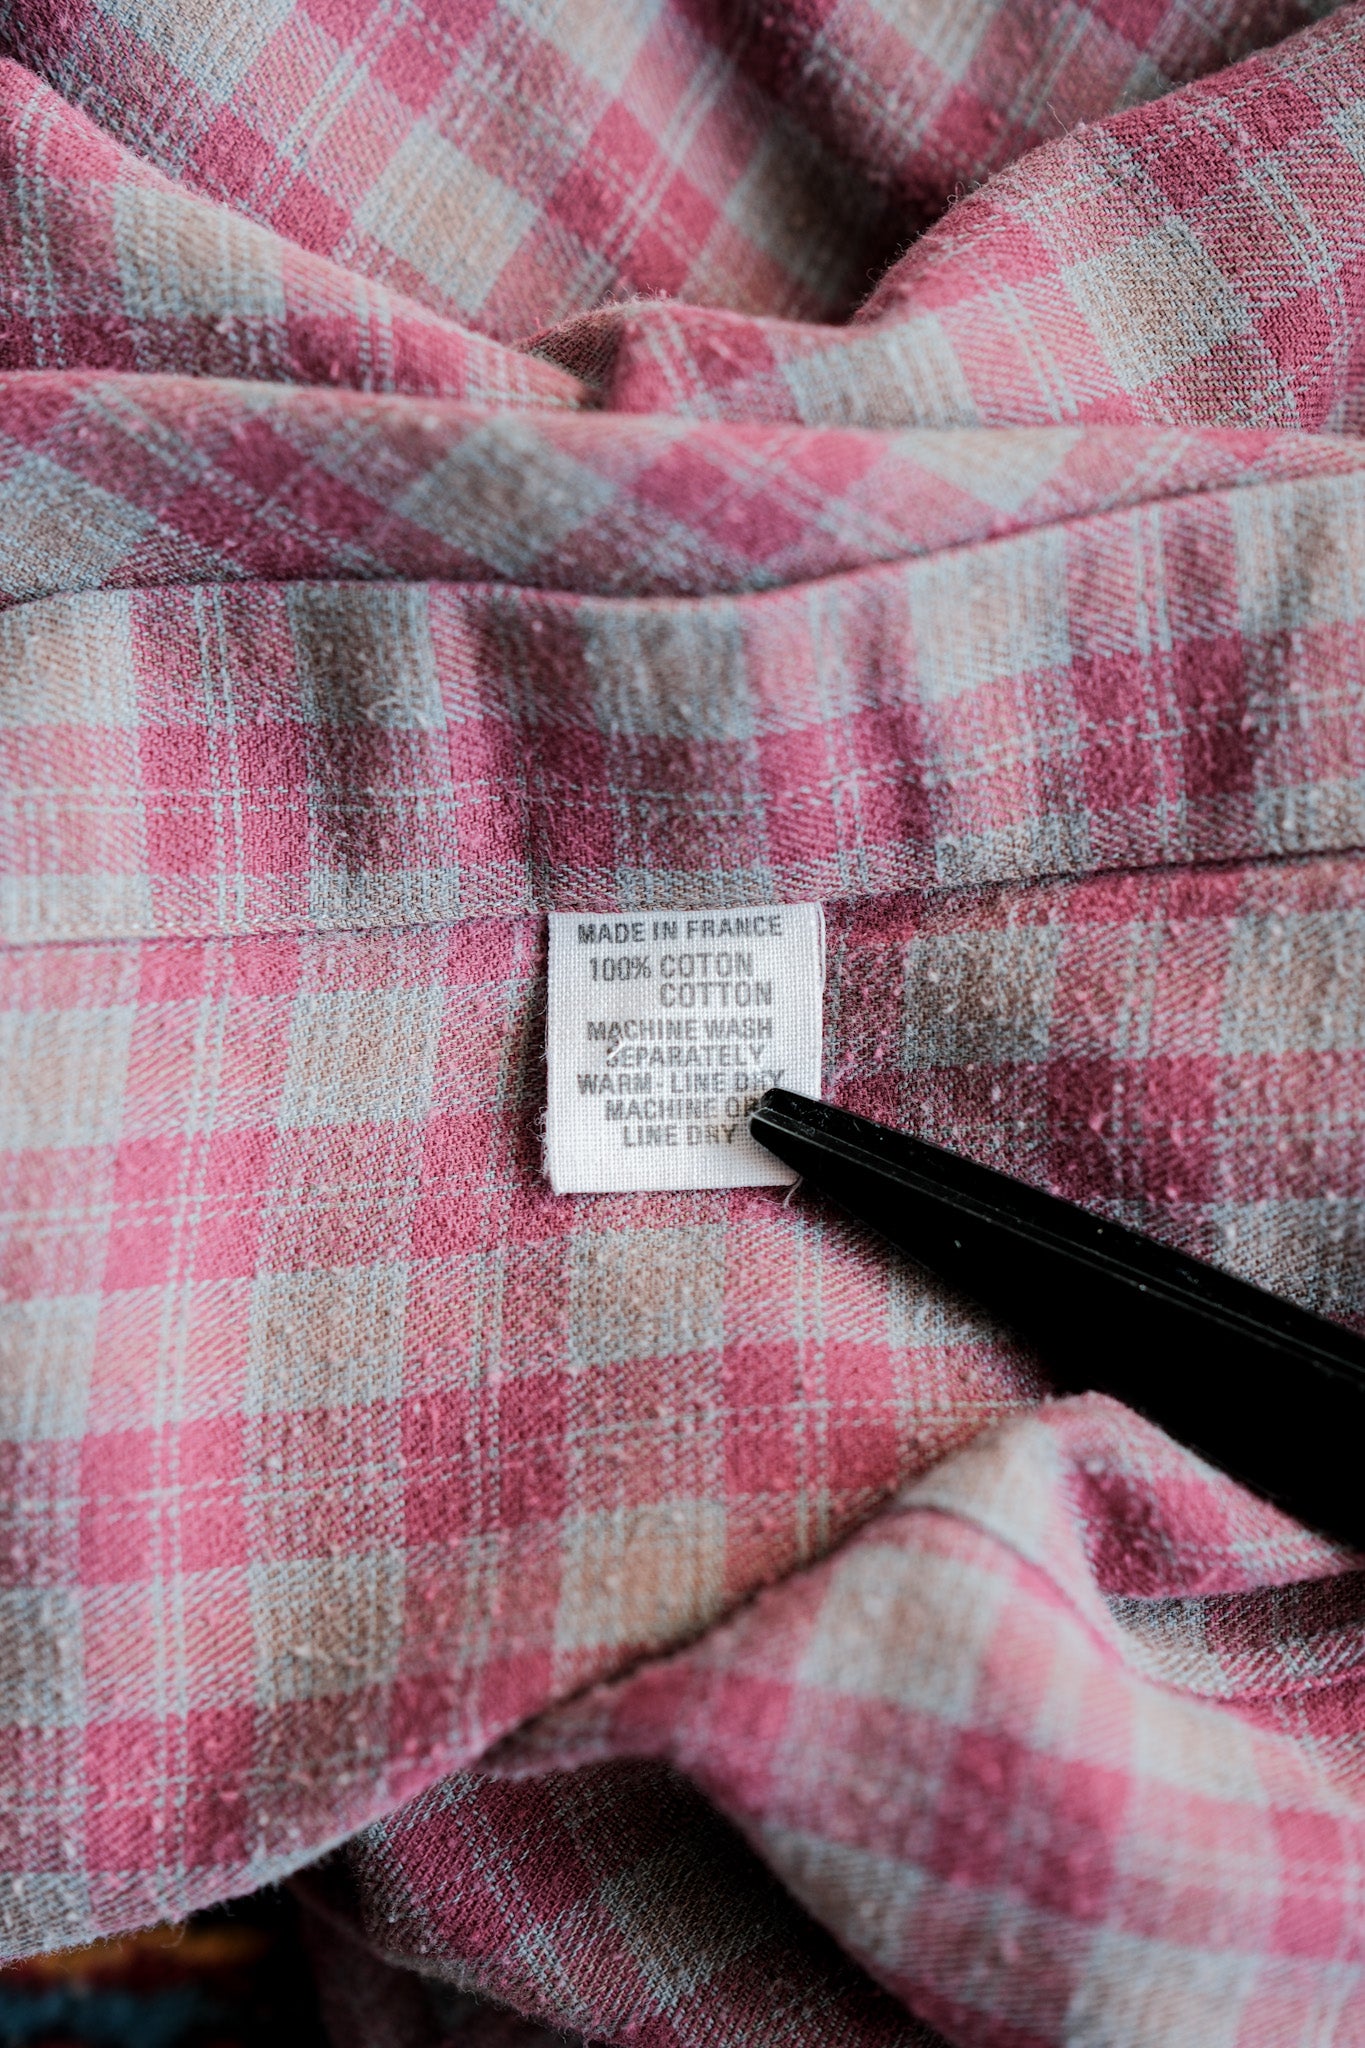 【~00's】Old Charvet Cotton Checked Shirt Size.38